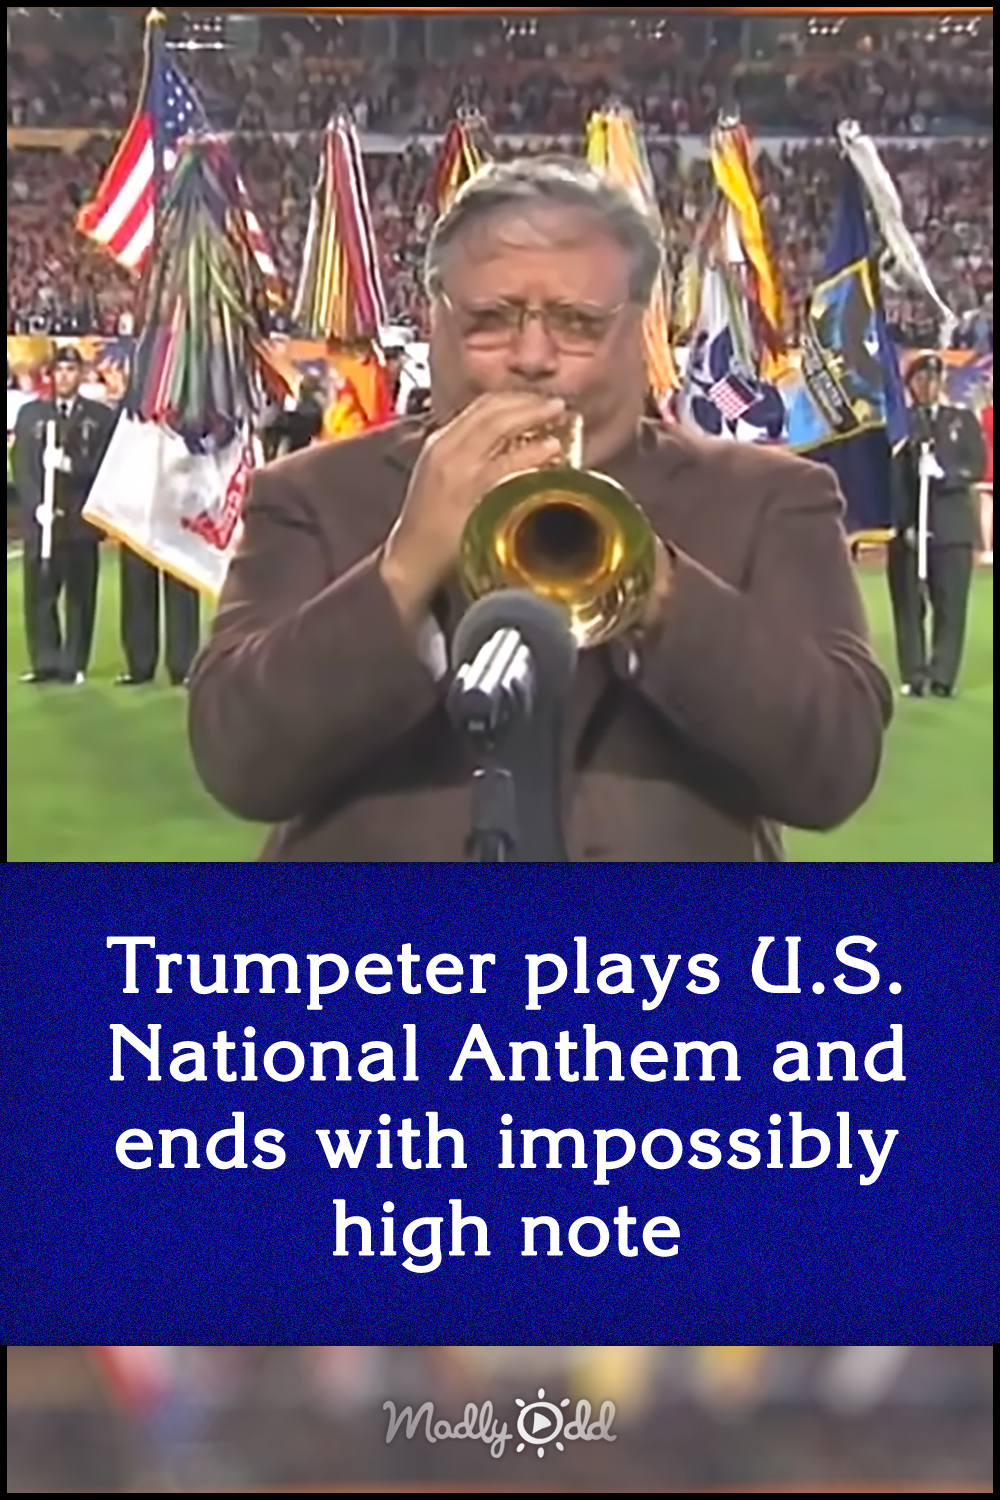 Trumpeter plays U.S. National Anthem and ends with impossibly high note